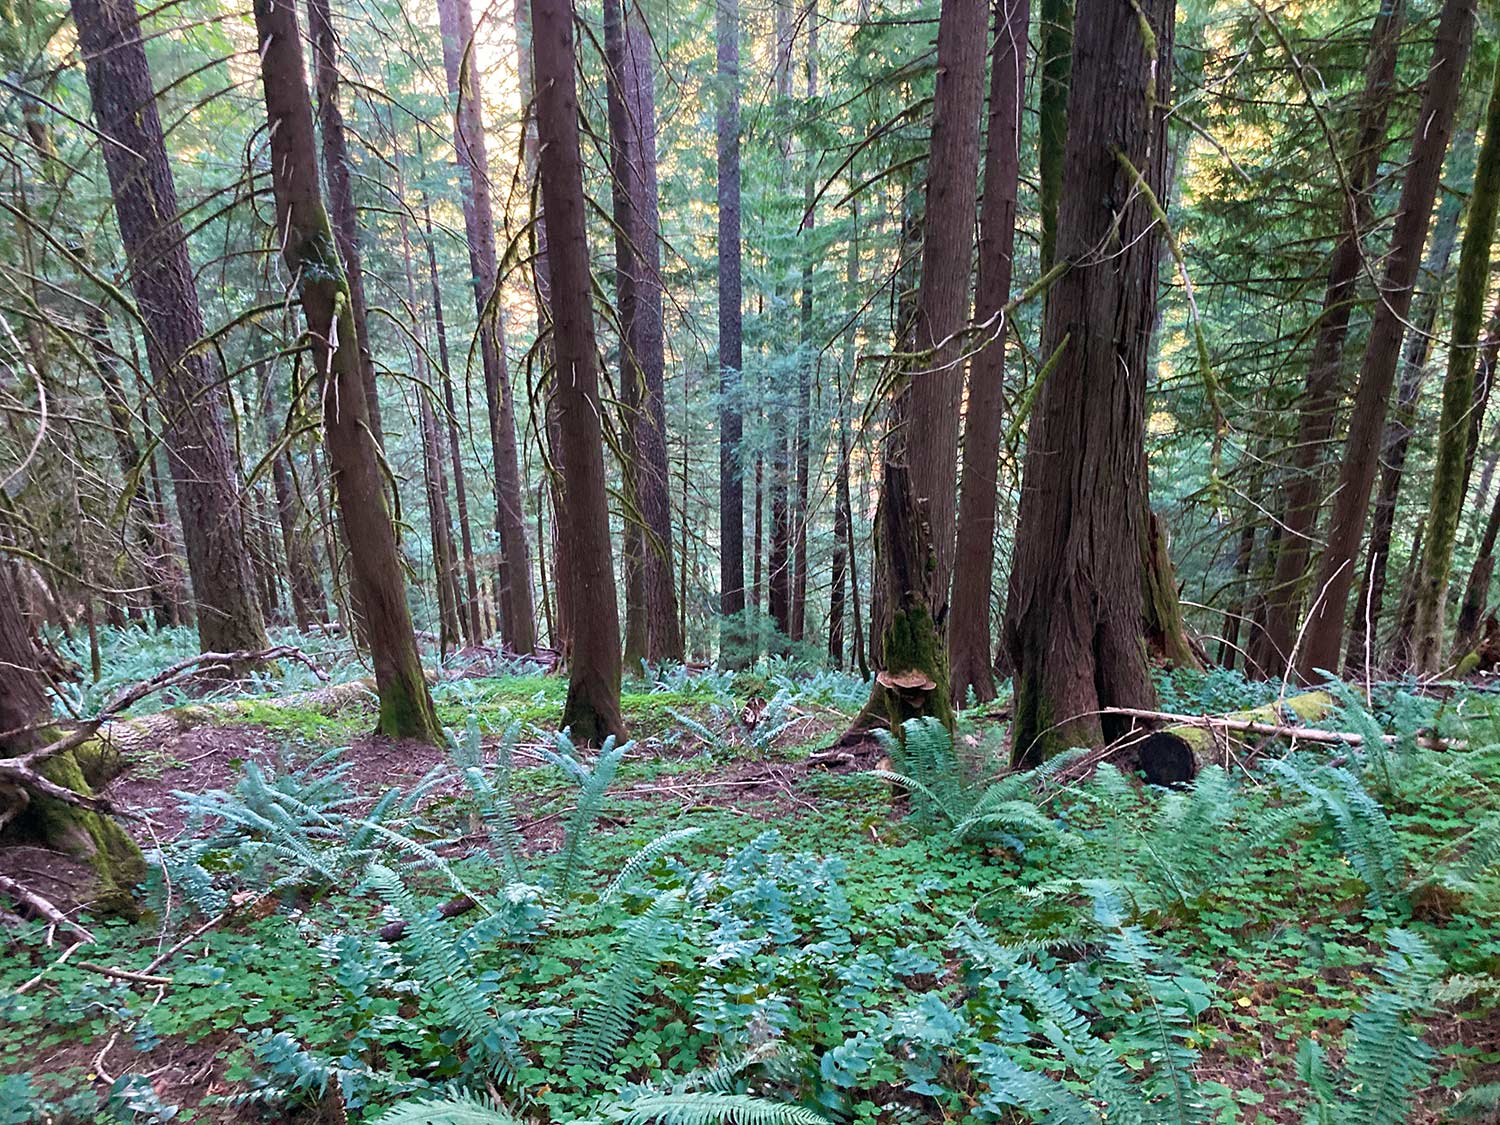 Green conifer trees of hemlock, cedar, and douglas fir on a hillside, with green ferns and oxalis in the foreground